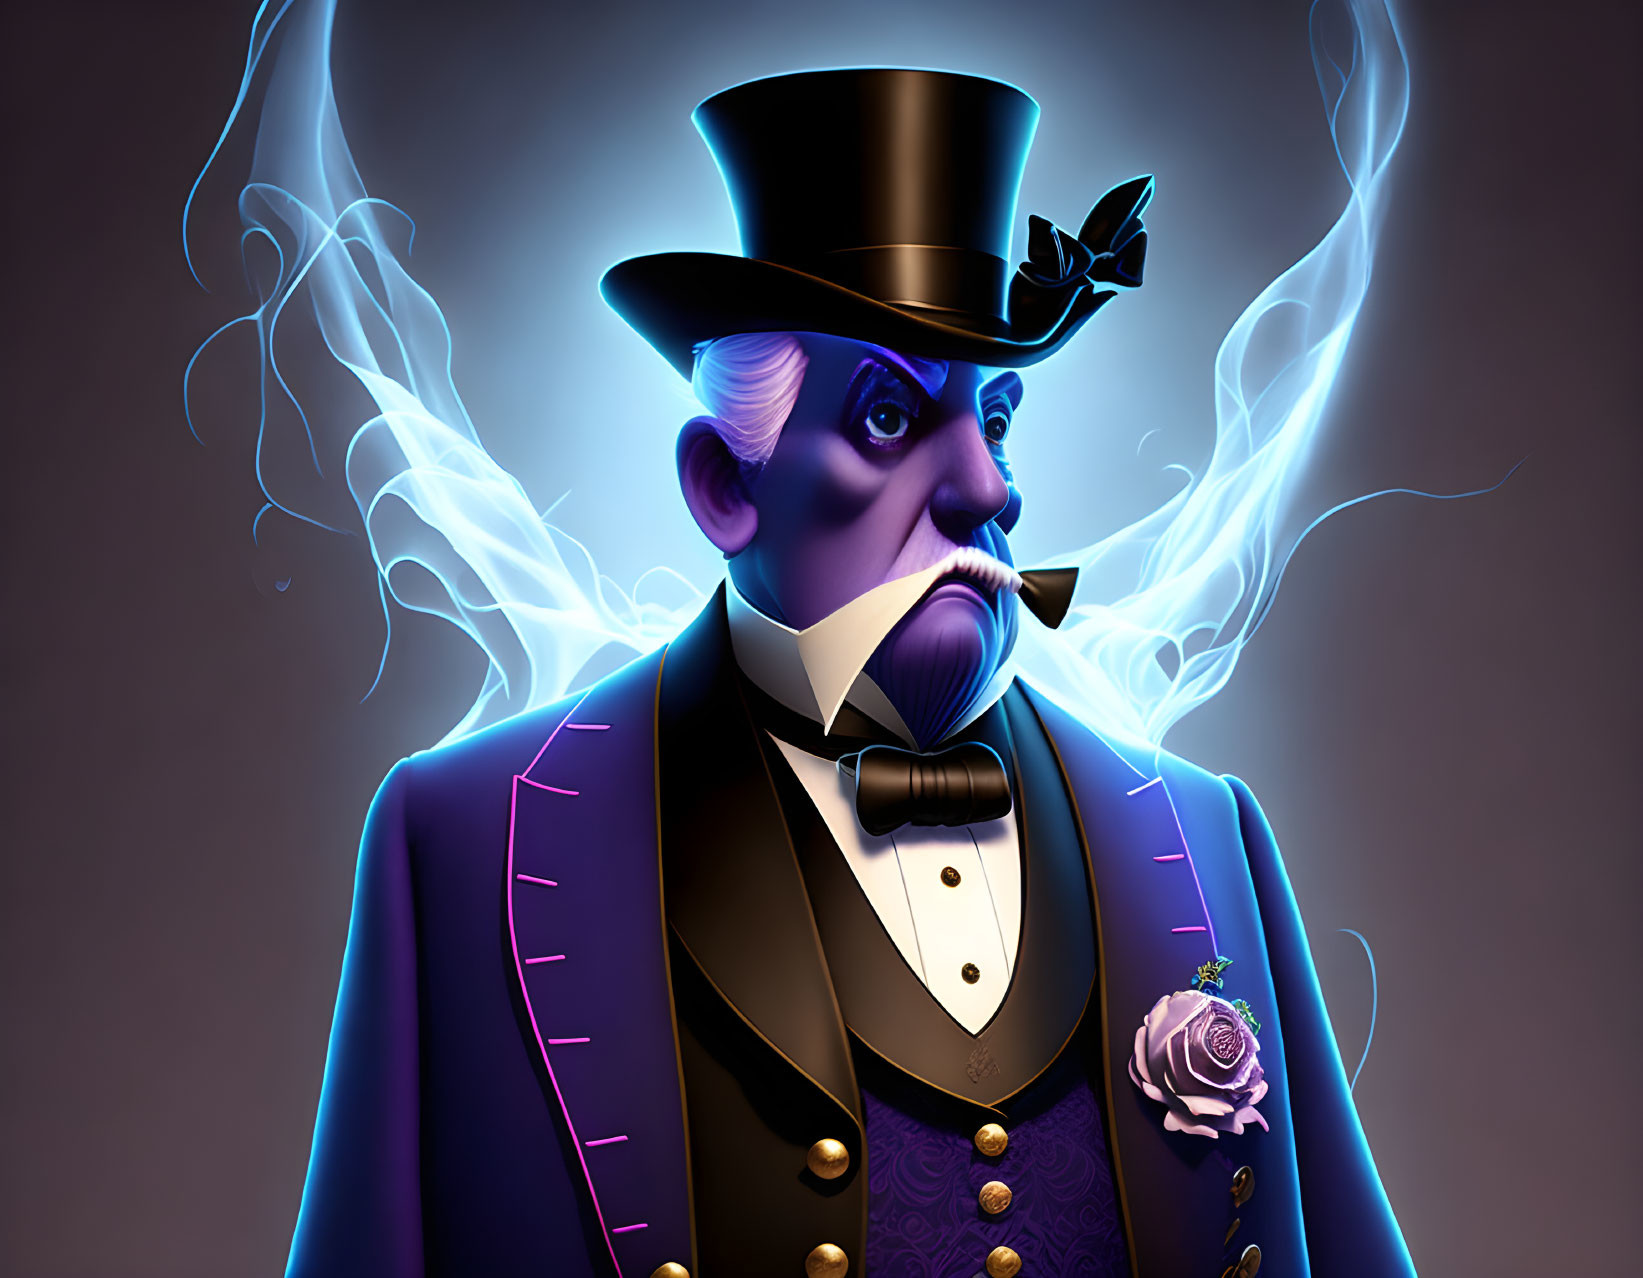 Victorian gentleman with top hat and glowing blue energy portrait